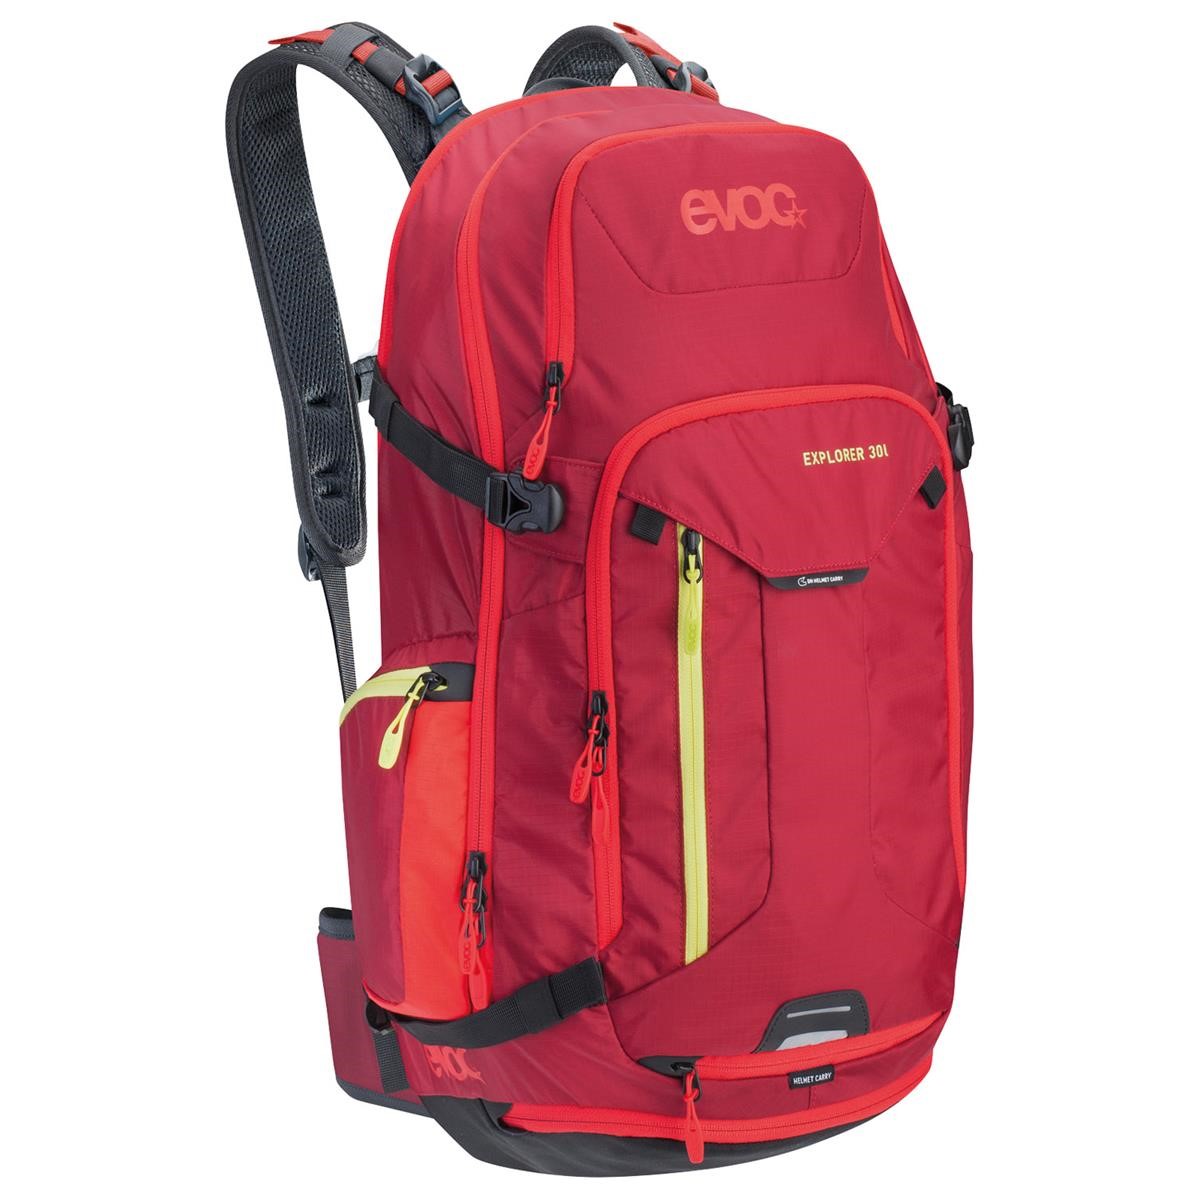 Evoc Backpack with Hydration System Compartment Explorer Ruby, 30 Liter